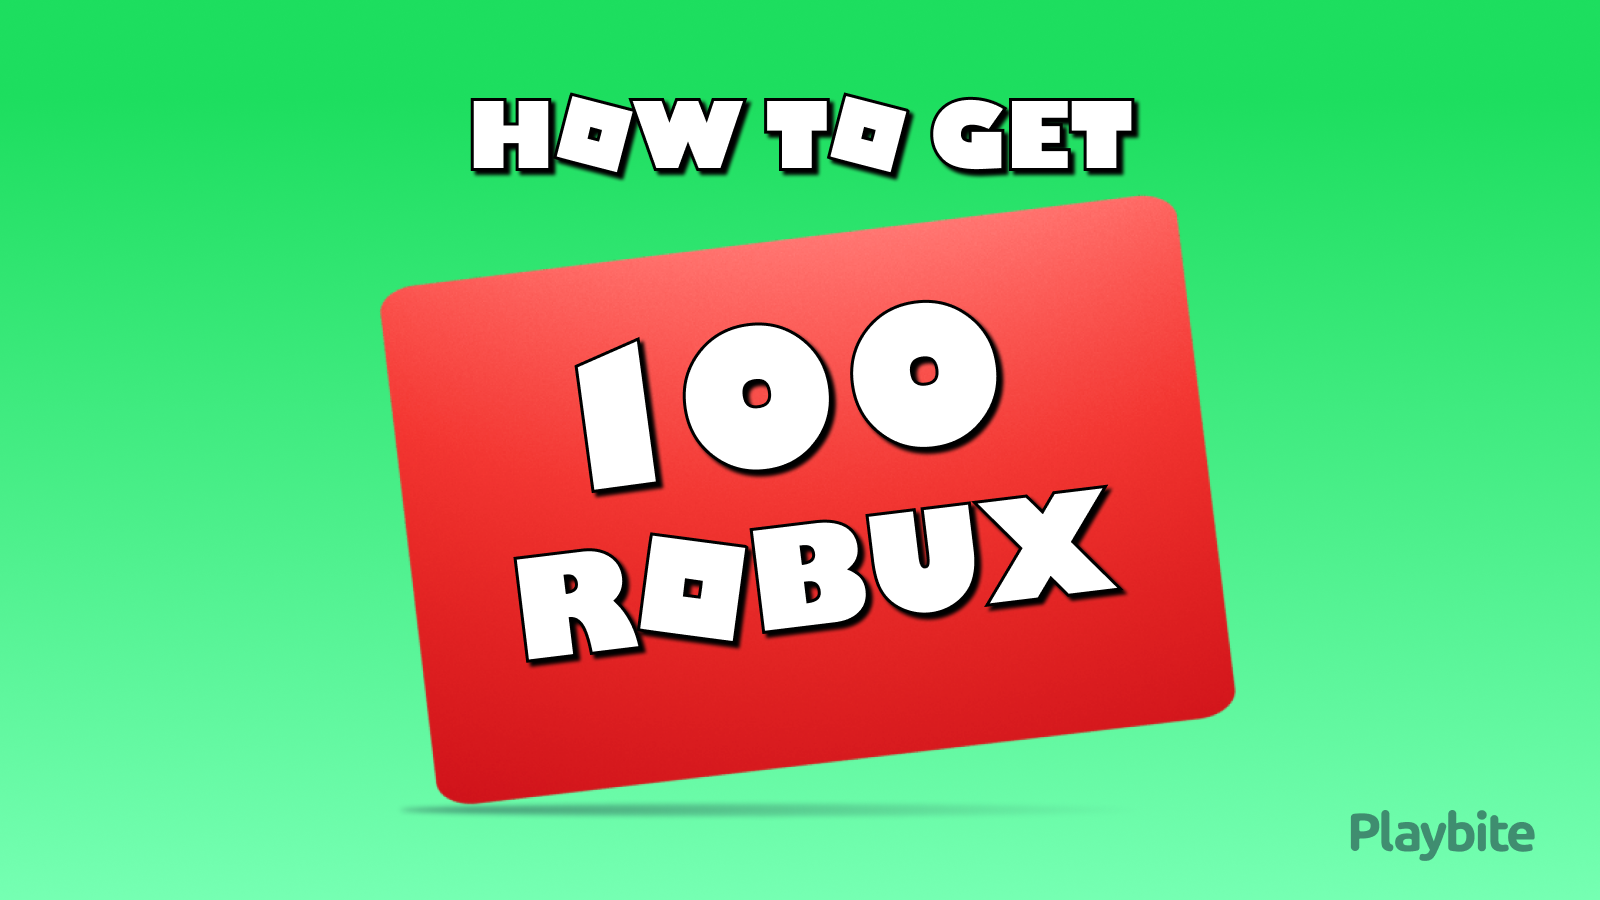 How To Get 100 Robux For Free